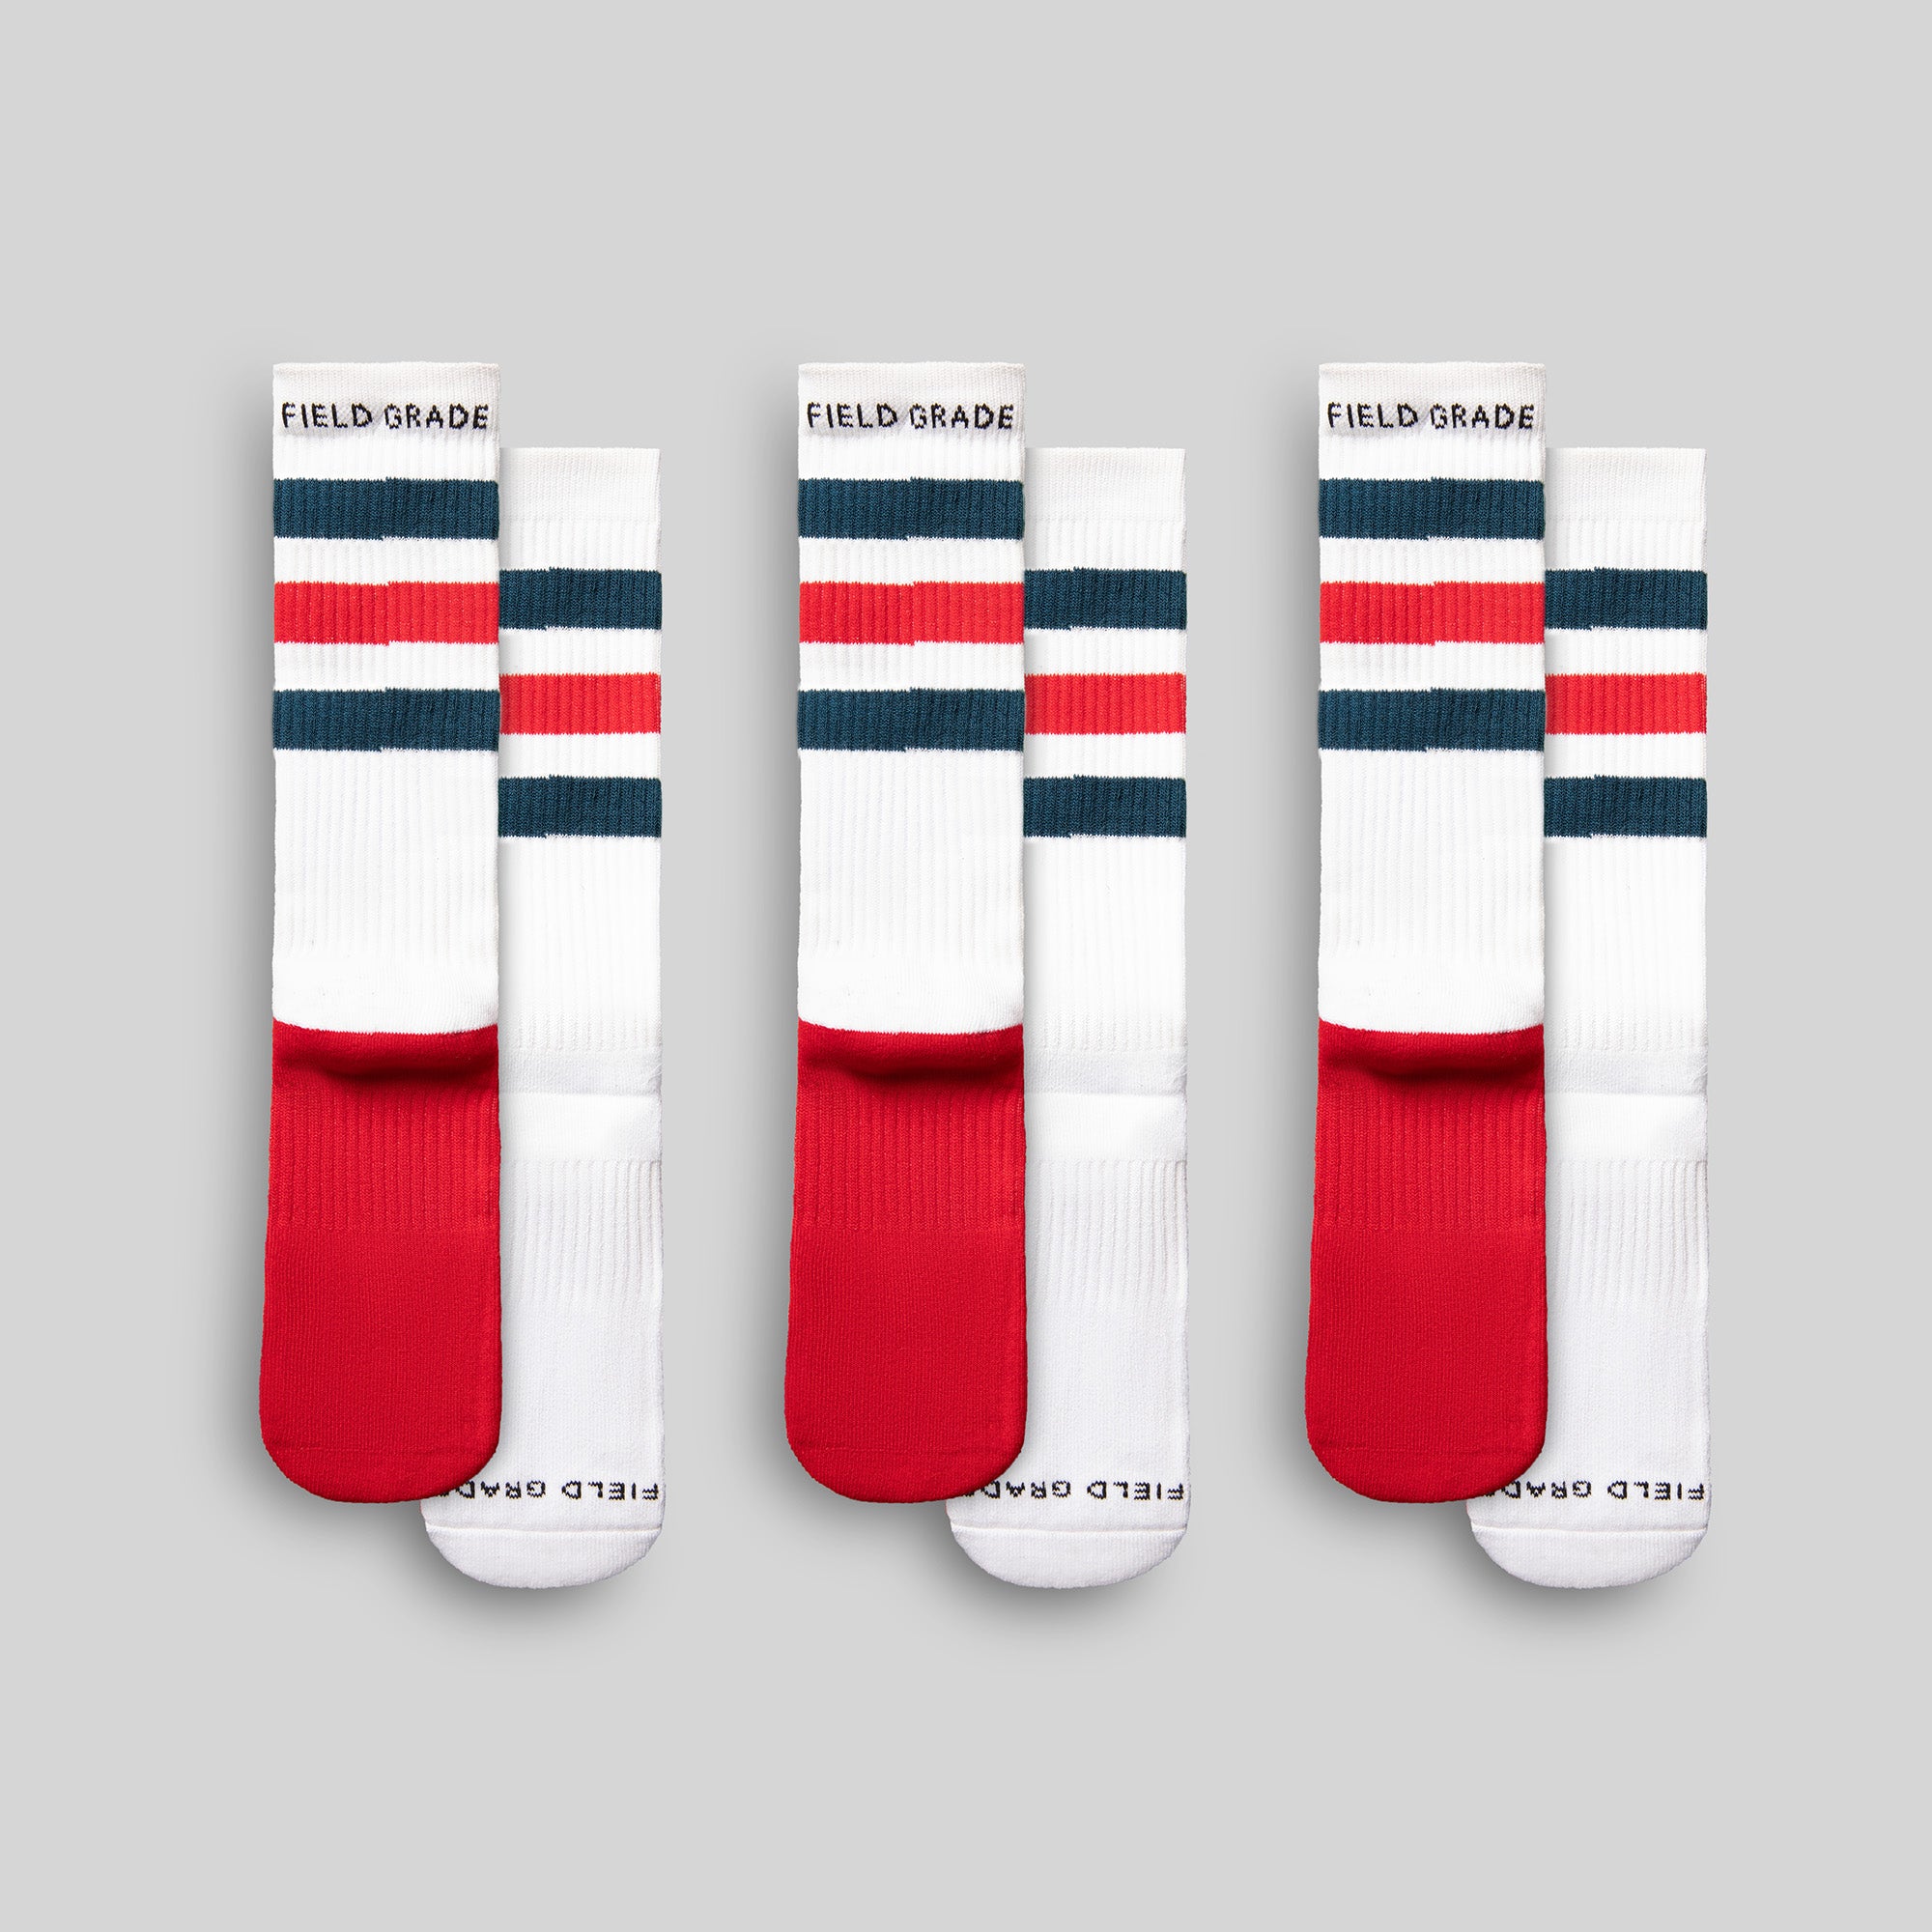 FIELD GRADE STRIPES NAVY/RED CUSHIONED CREW SOCK 3 PACK